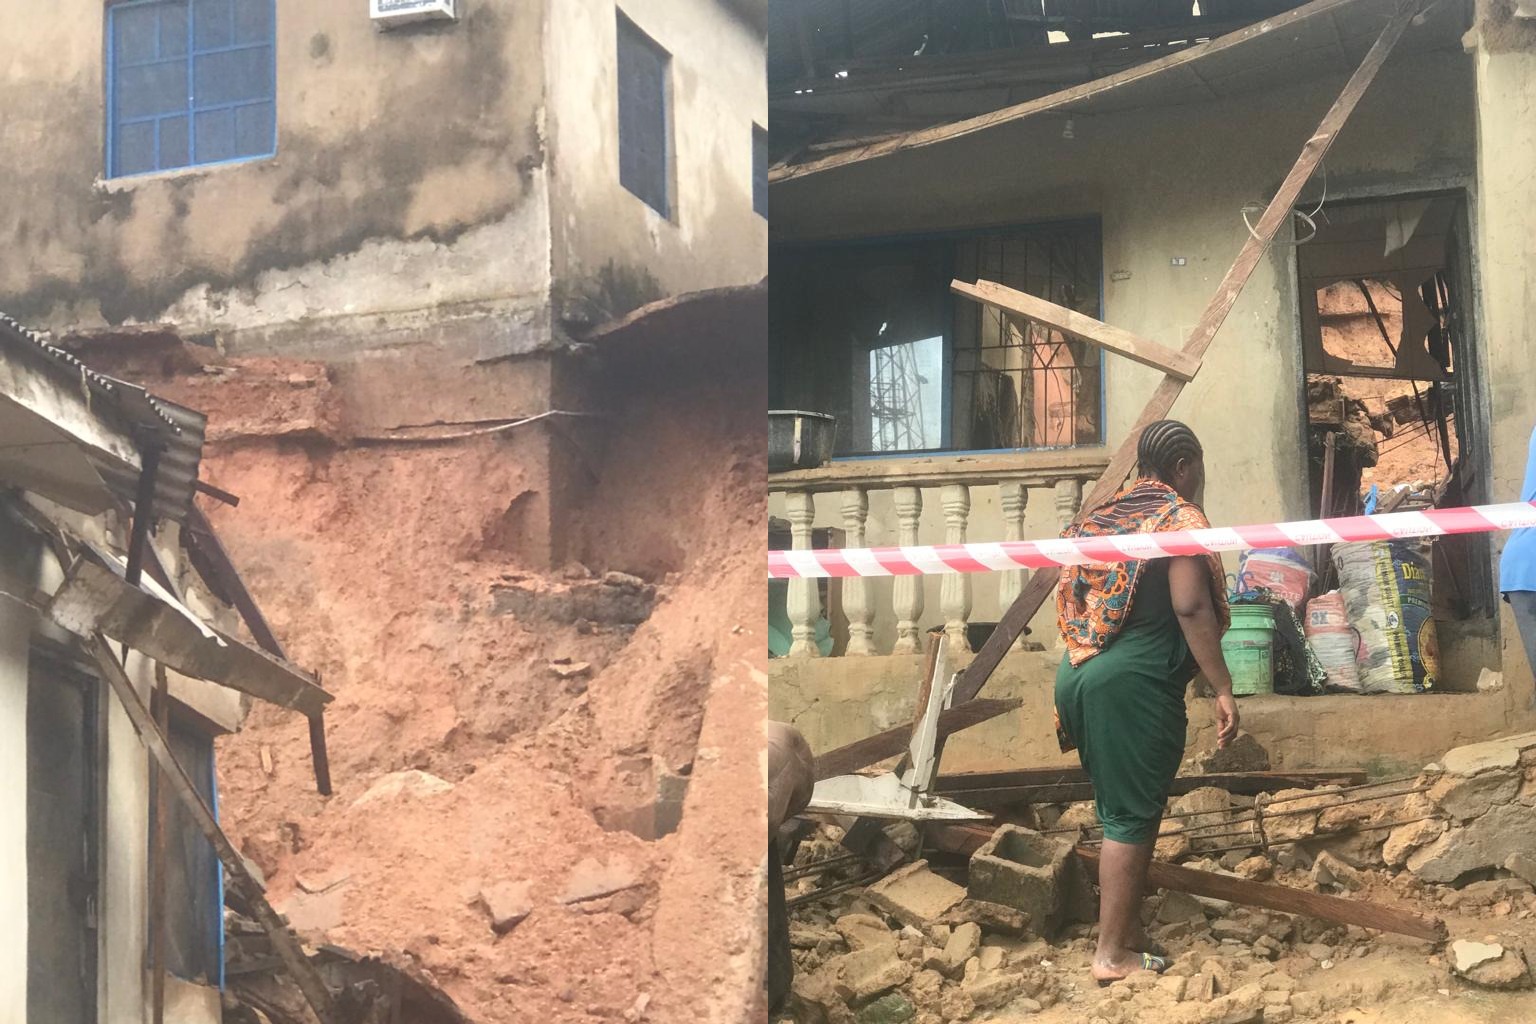 Two siblings d*e after fence from a neighboring compound collapsed into their home